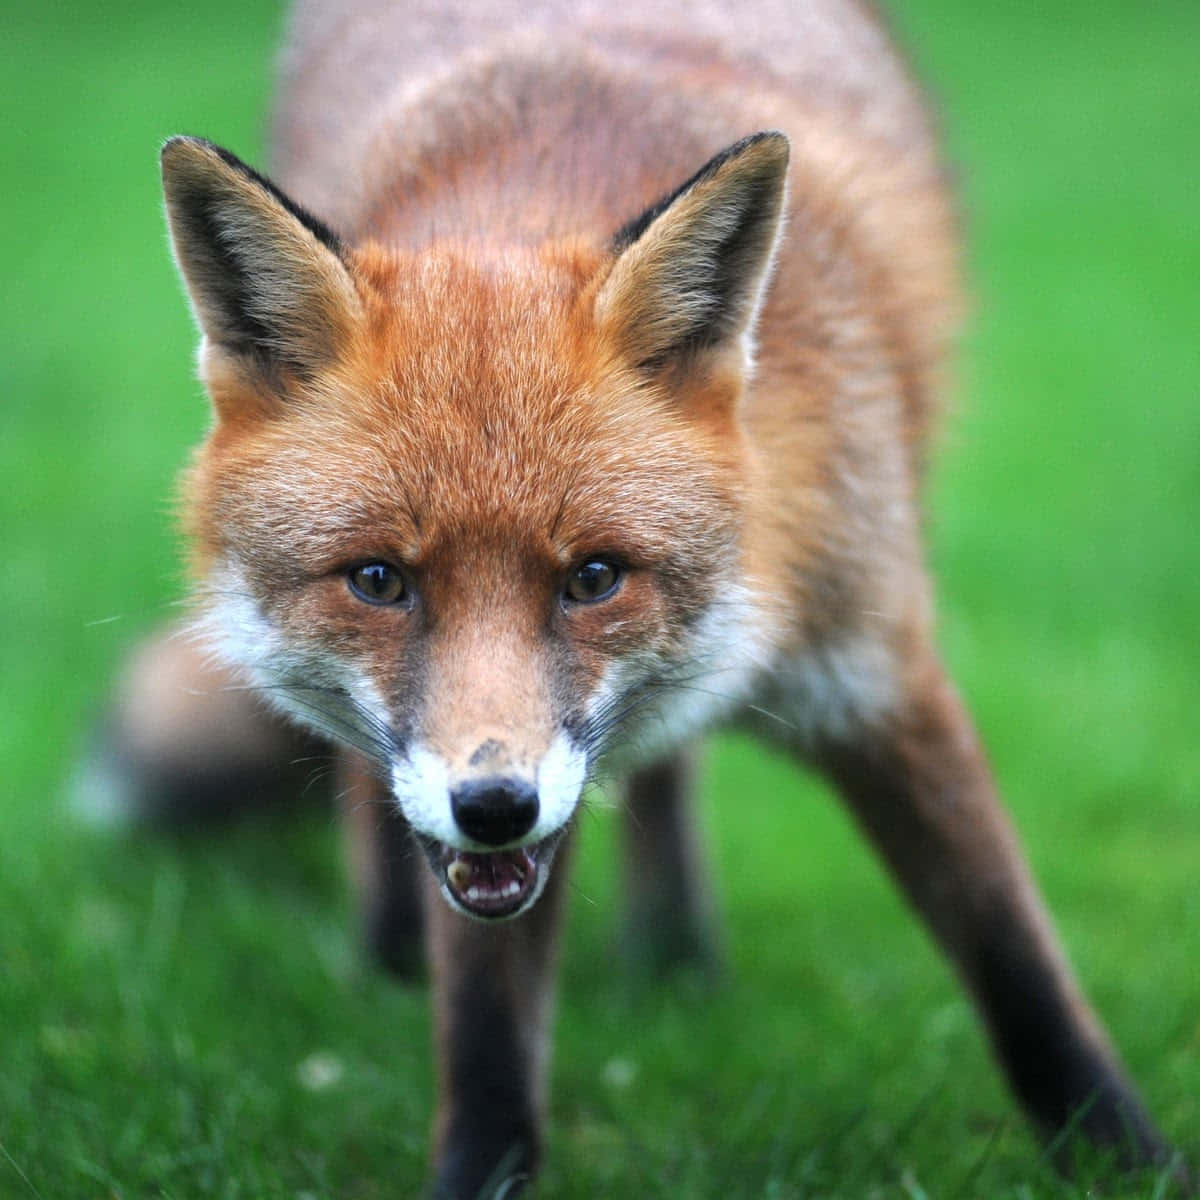 A Friendly Red Fox With Its Ears Perked Up